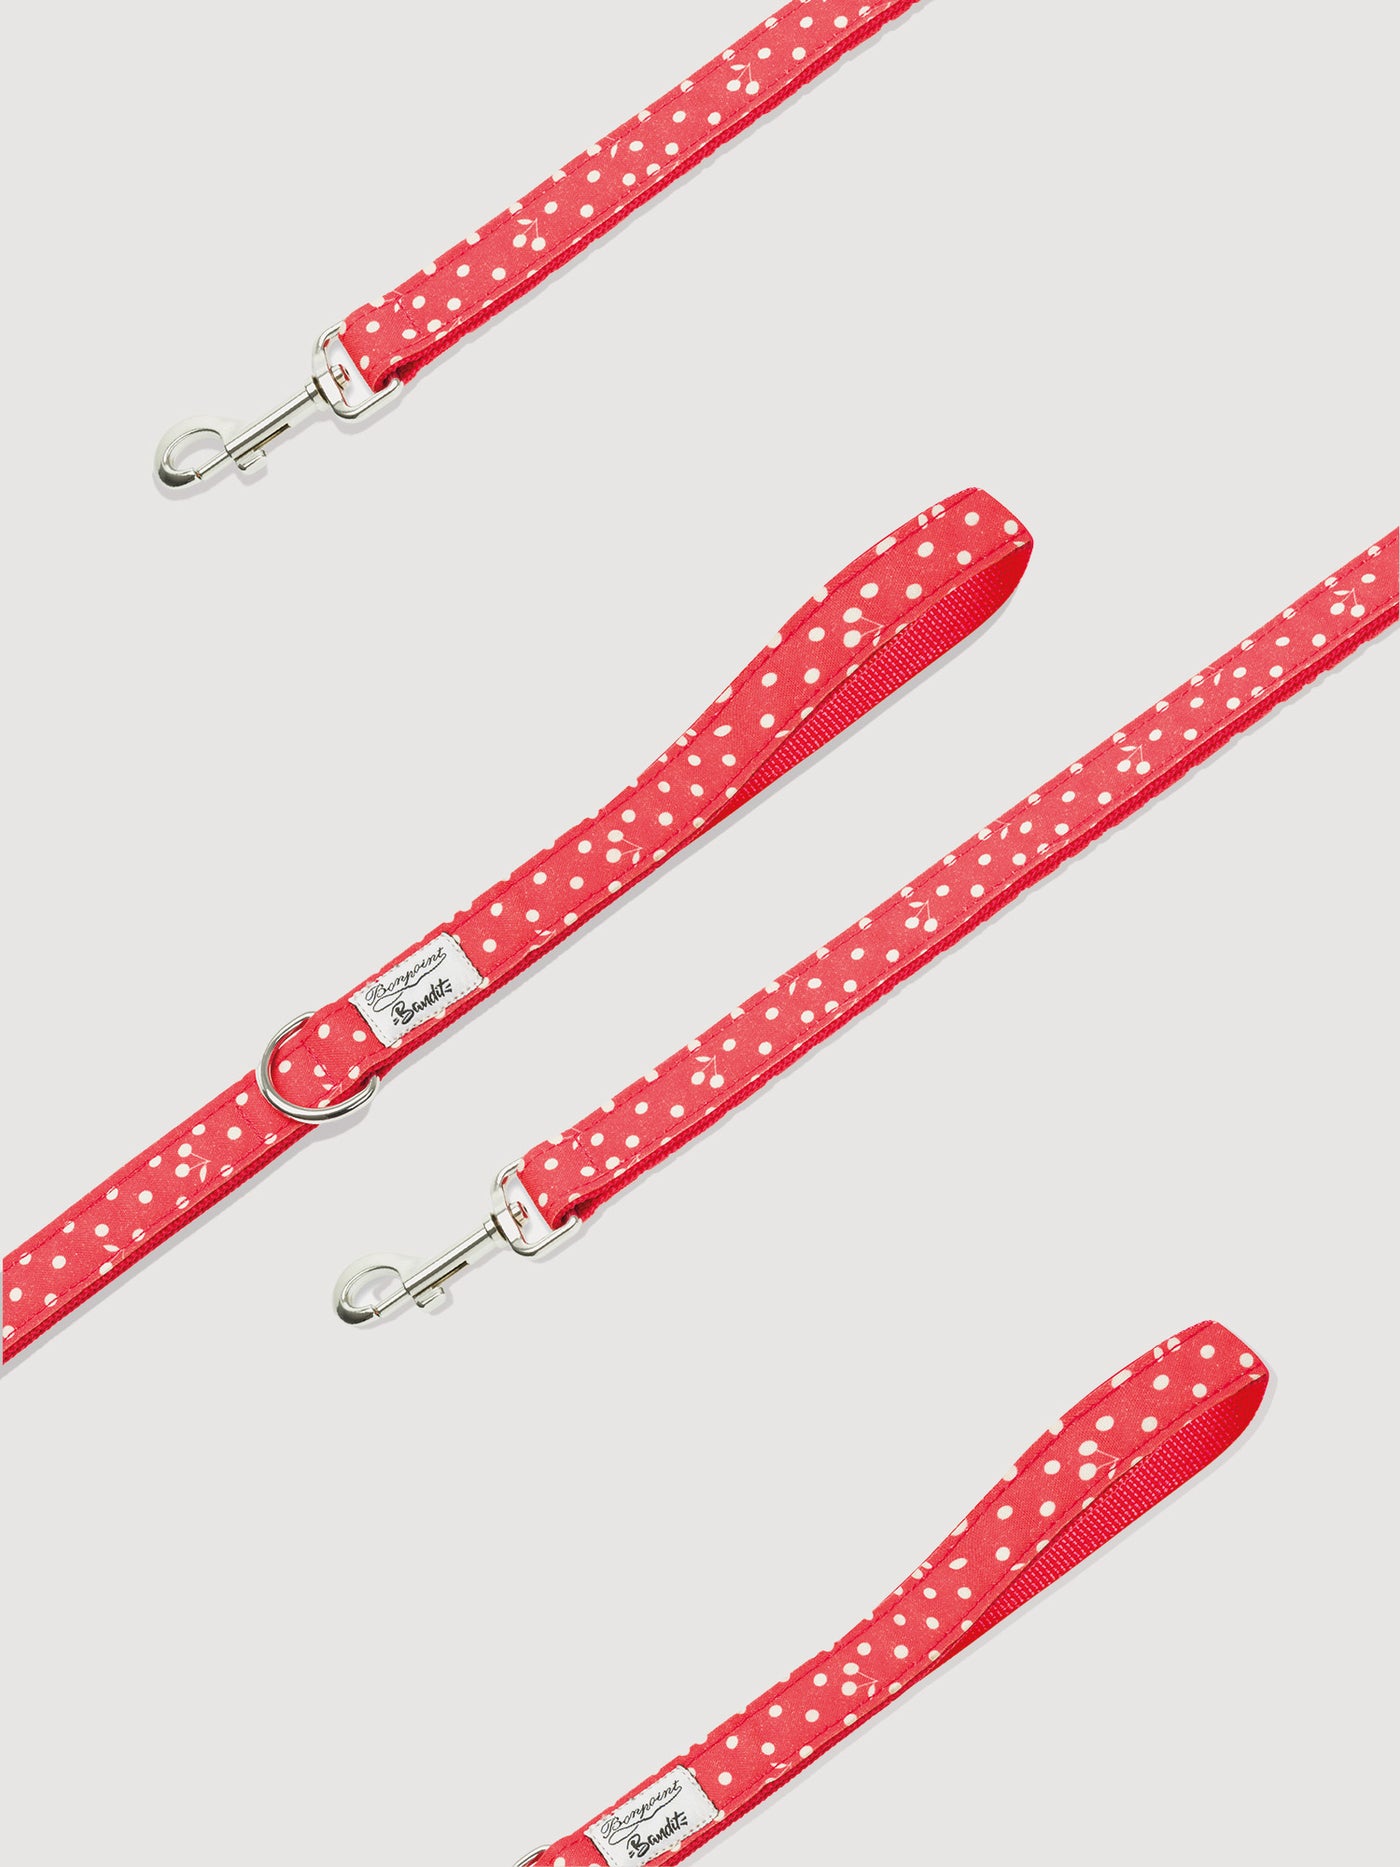 Bonpoint x French Bandit Leash 47 1/4 in. red